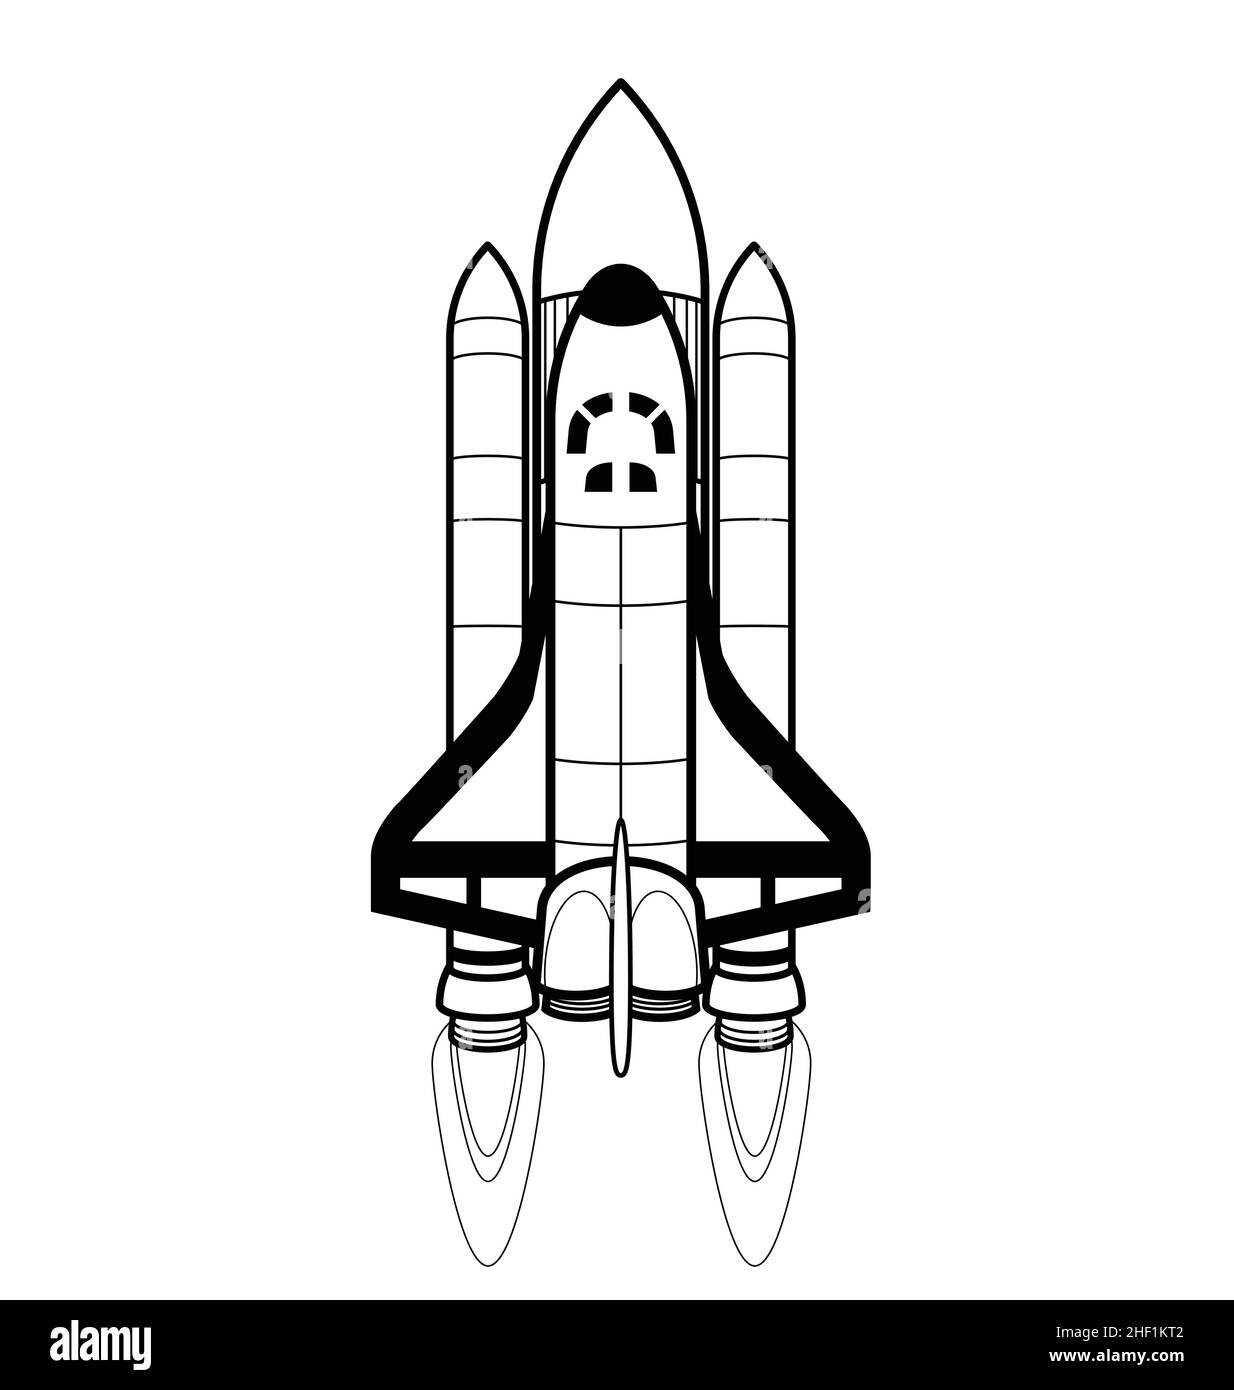 Space shuttle vector Black and White Stock Photos & Images - Alamy